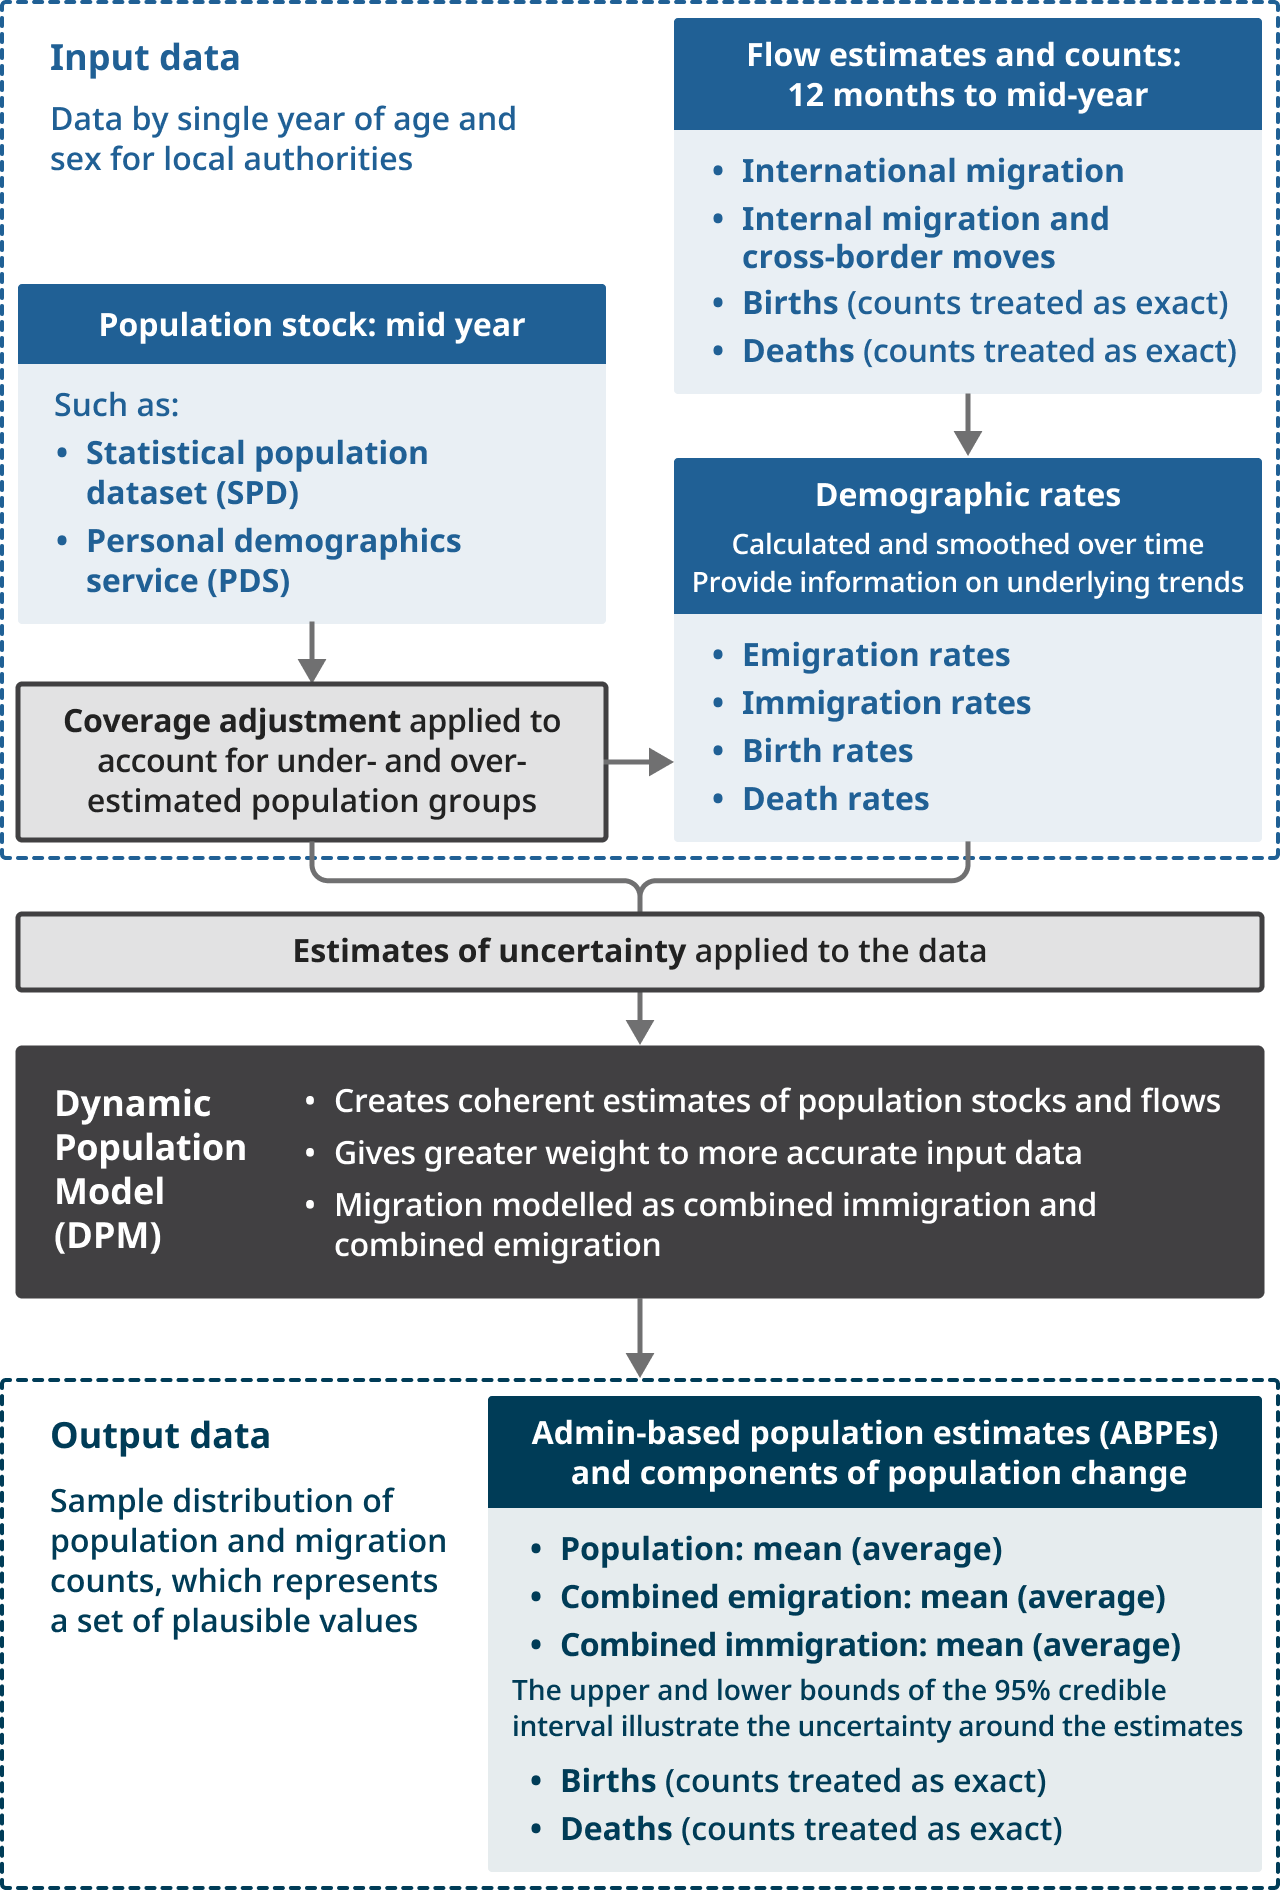 An image showing how the Dynamic Population Model (DPM) estimates the population and components of population change for local authorities